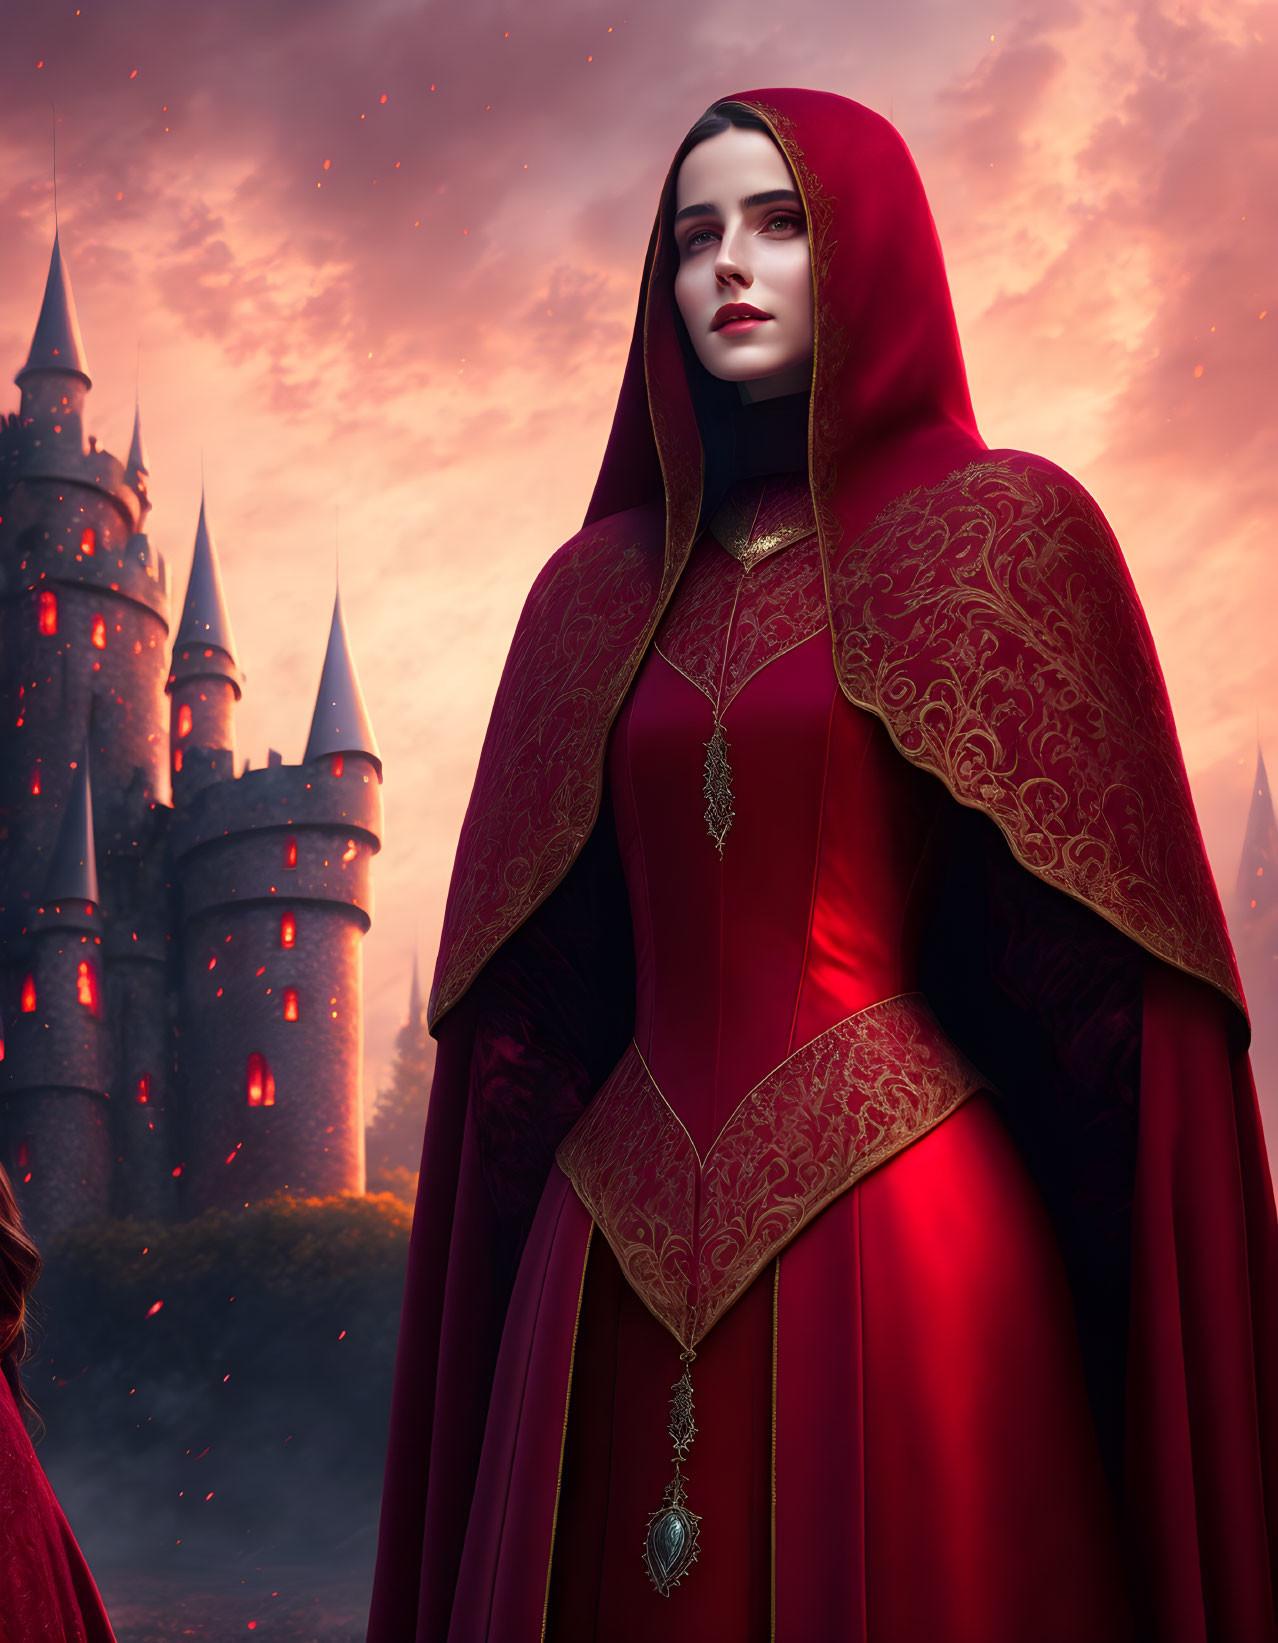 Regal woman in red cloak with intricate patterns before castle